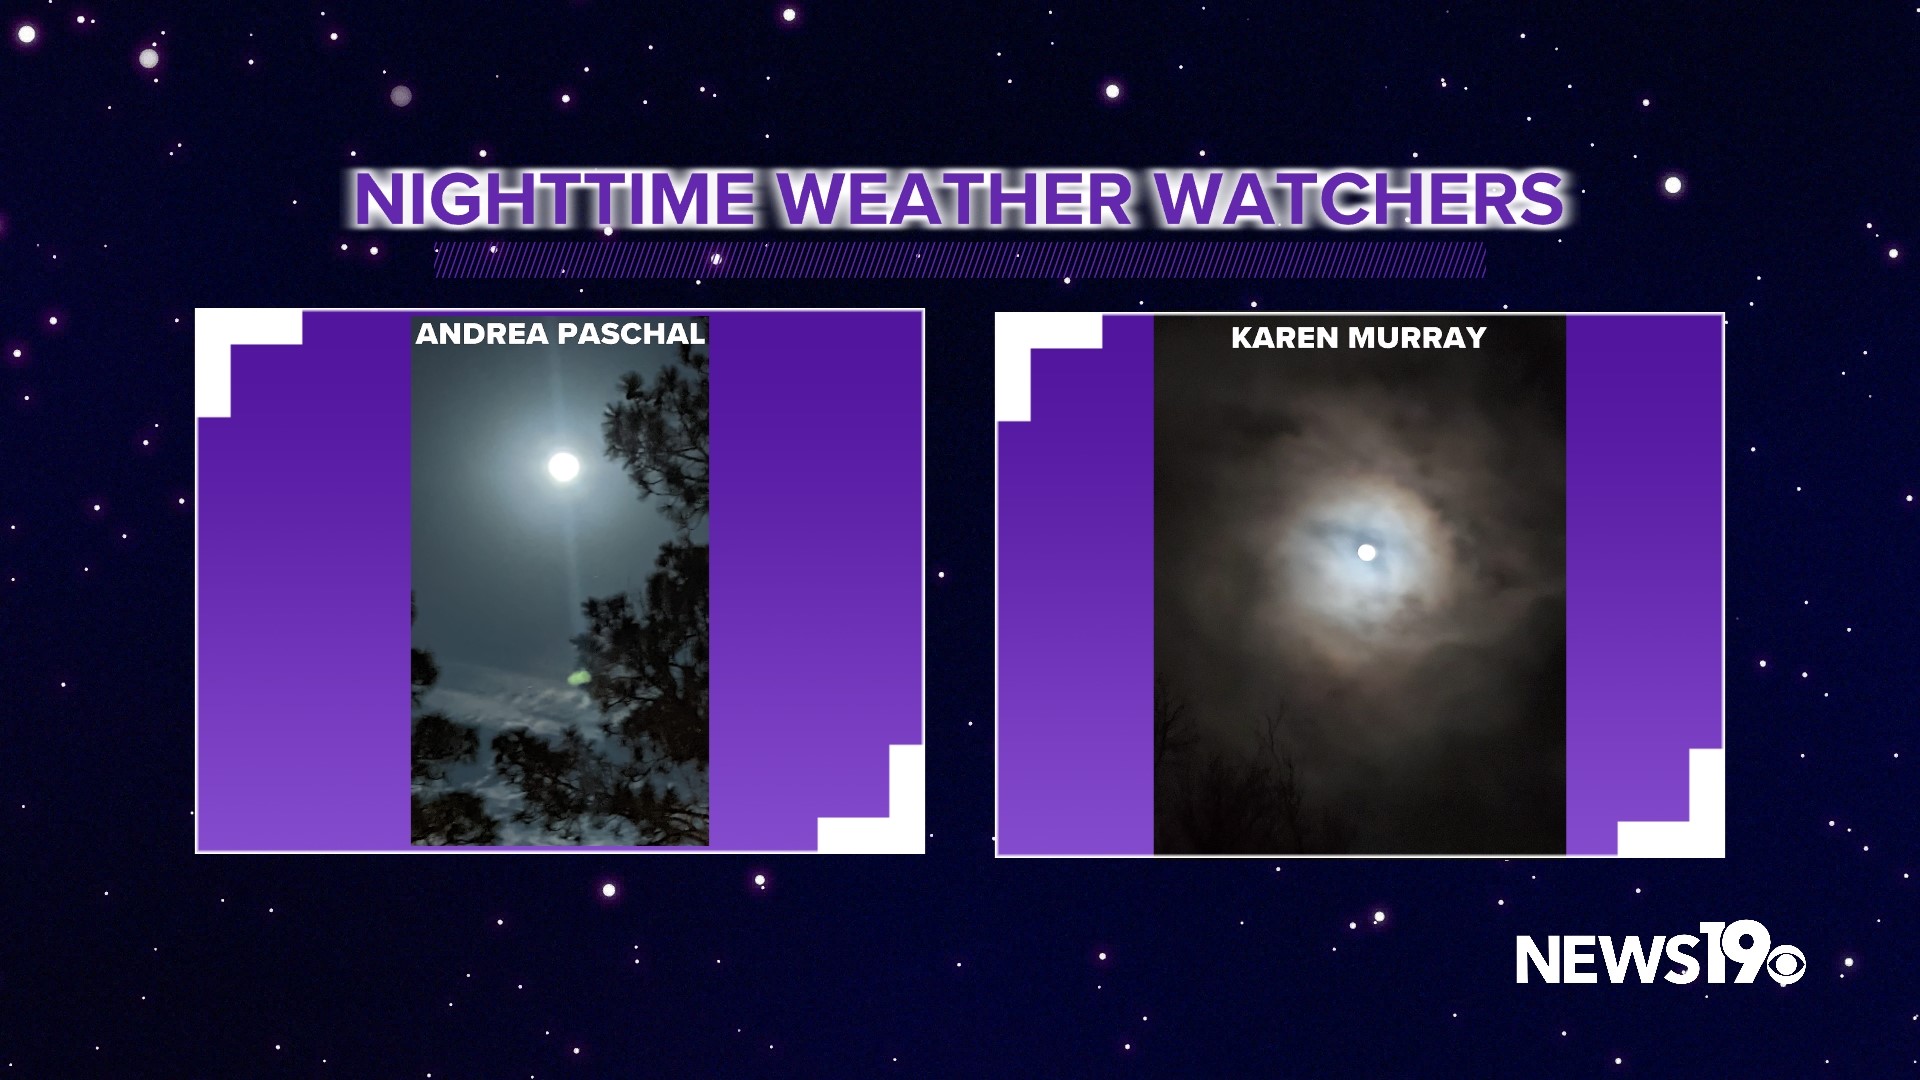 Some clouds move in this week, but conditions will be good for viewing the night sky many days.